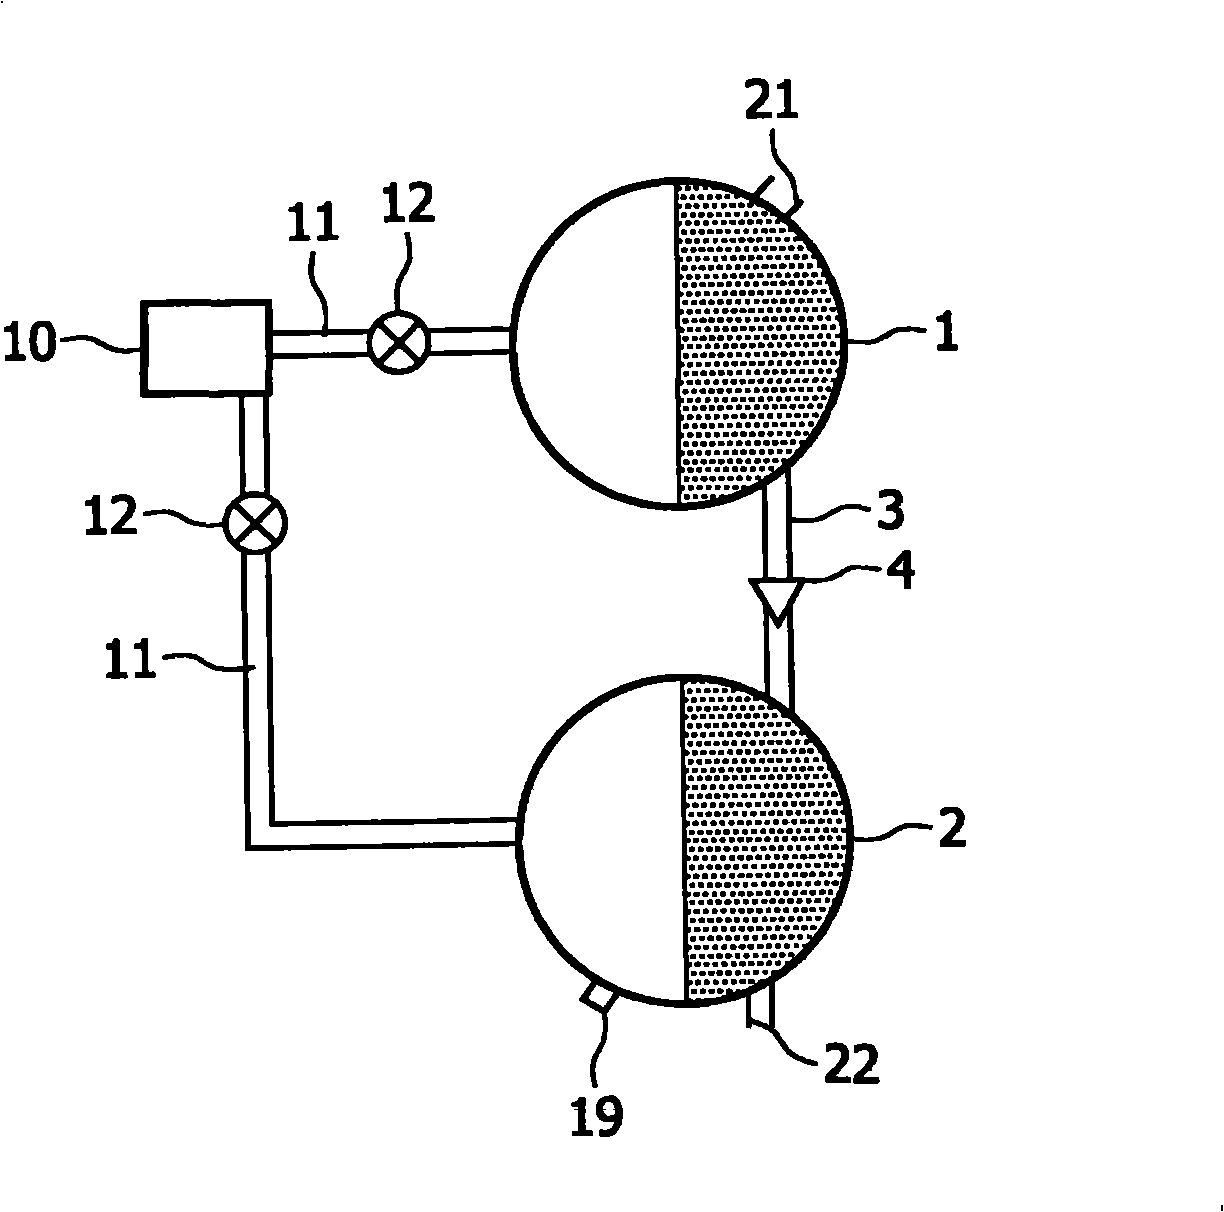 Fluid processing and volume determination system